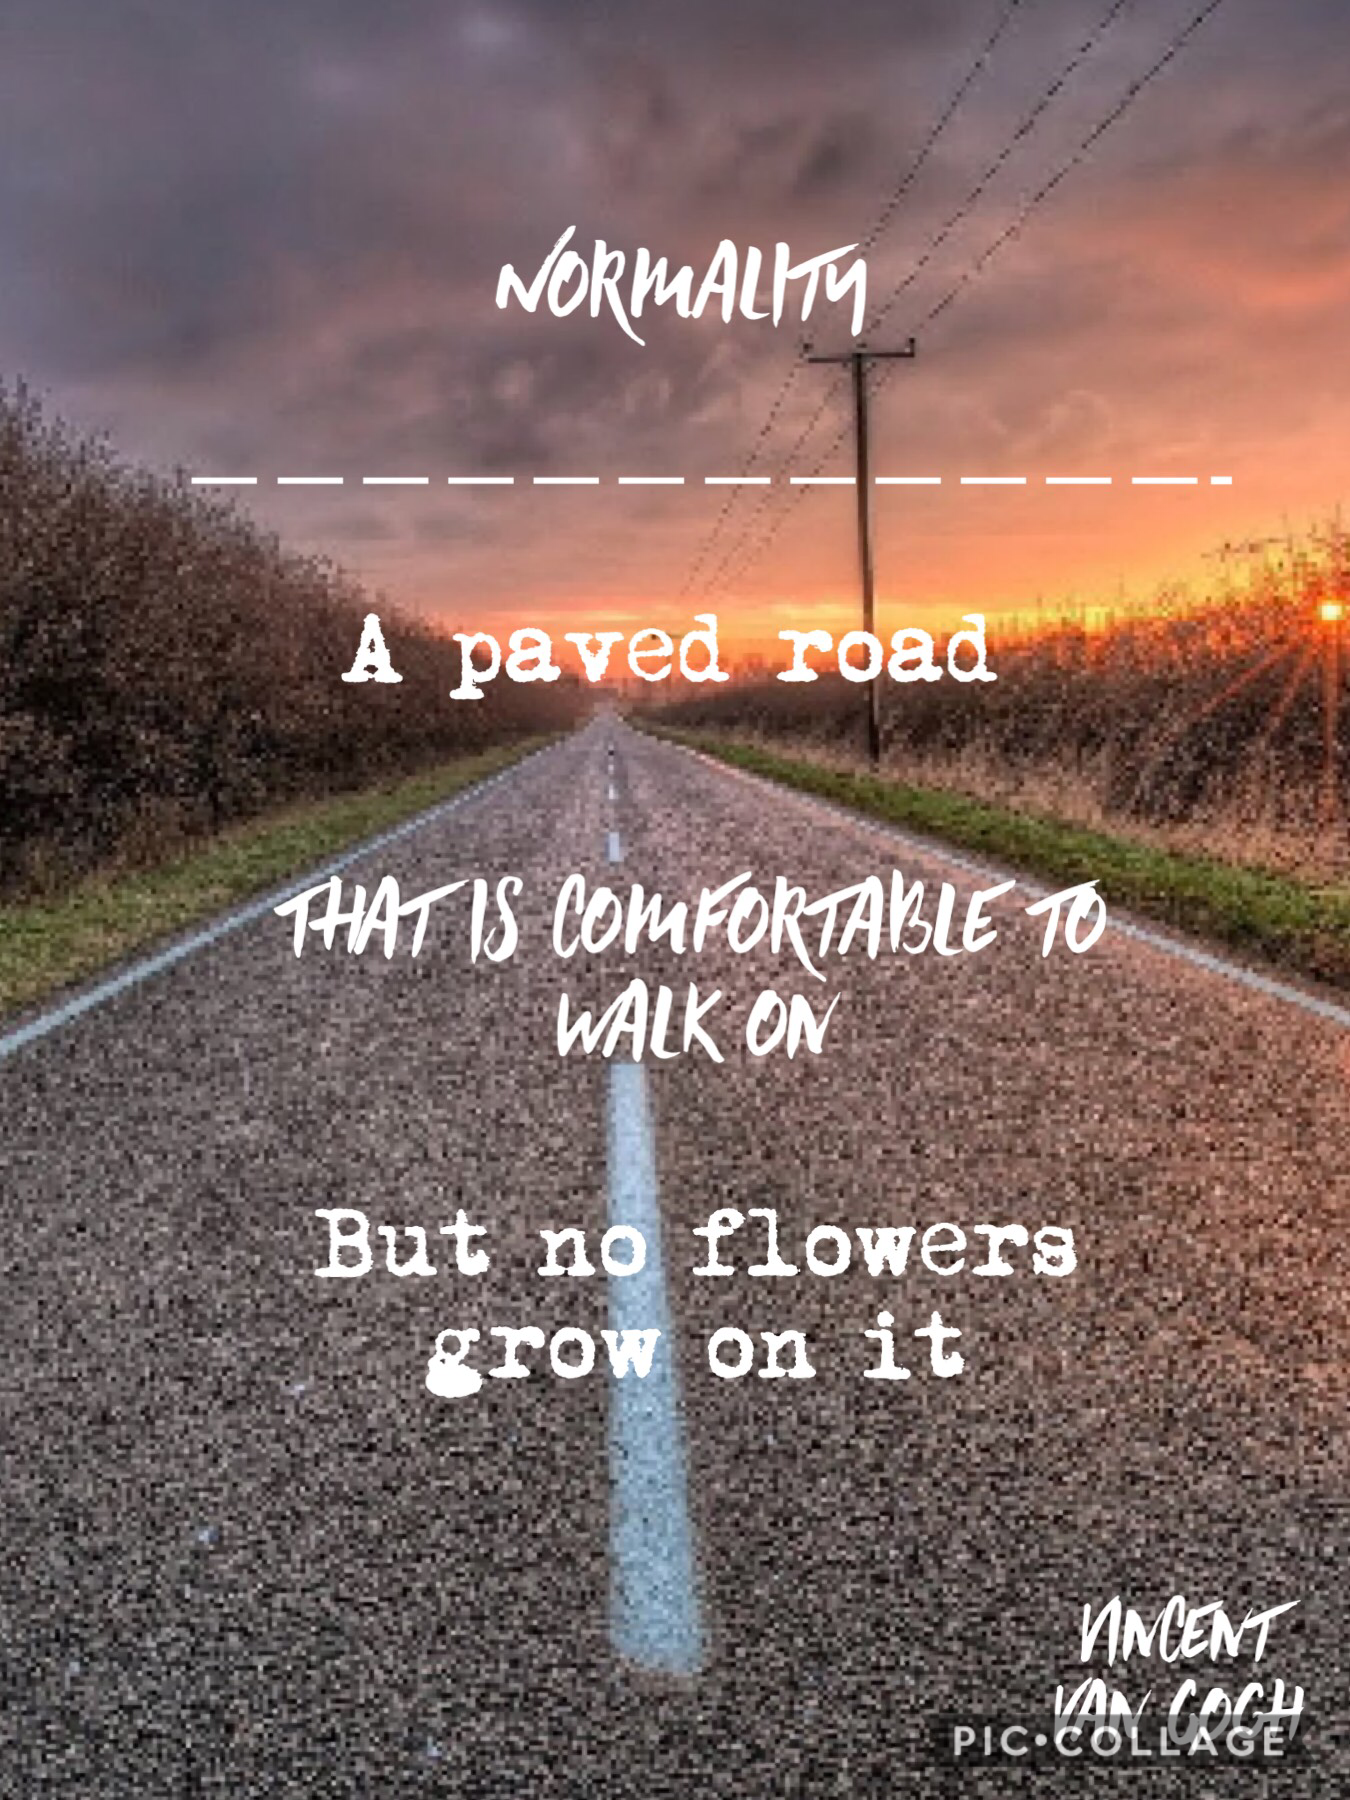 Normality...
Nobody wants to be “normal” they just want to fit in, but everyone says it normal to want to fit in....

Love the new fonts, it took forever to do this because I new what quote to do and I wanted these fonts but I couldn’t find a background

